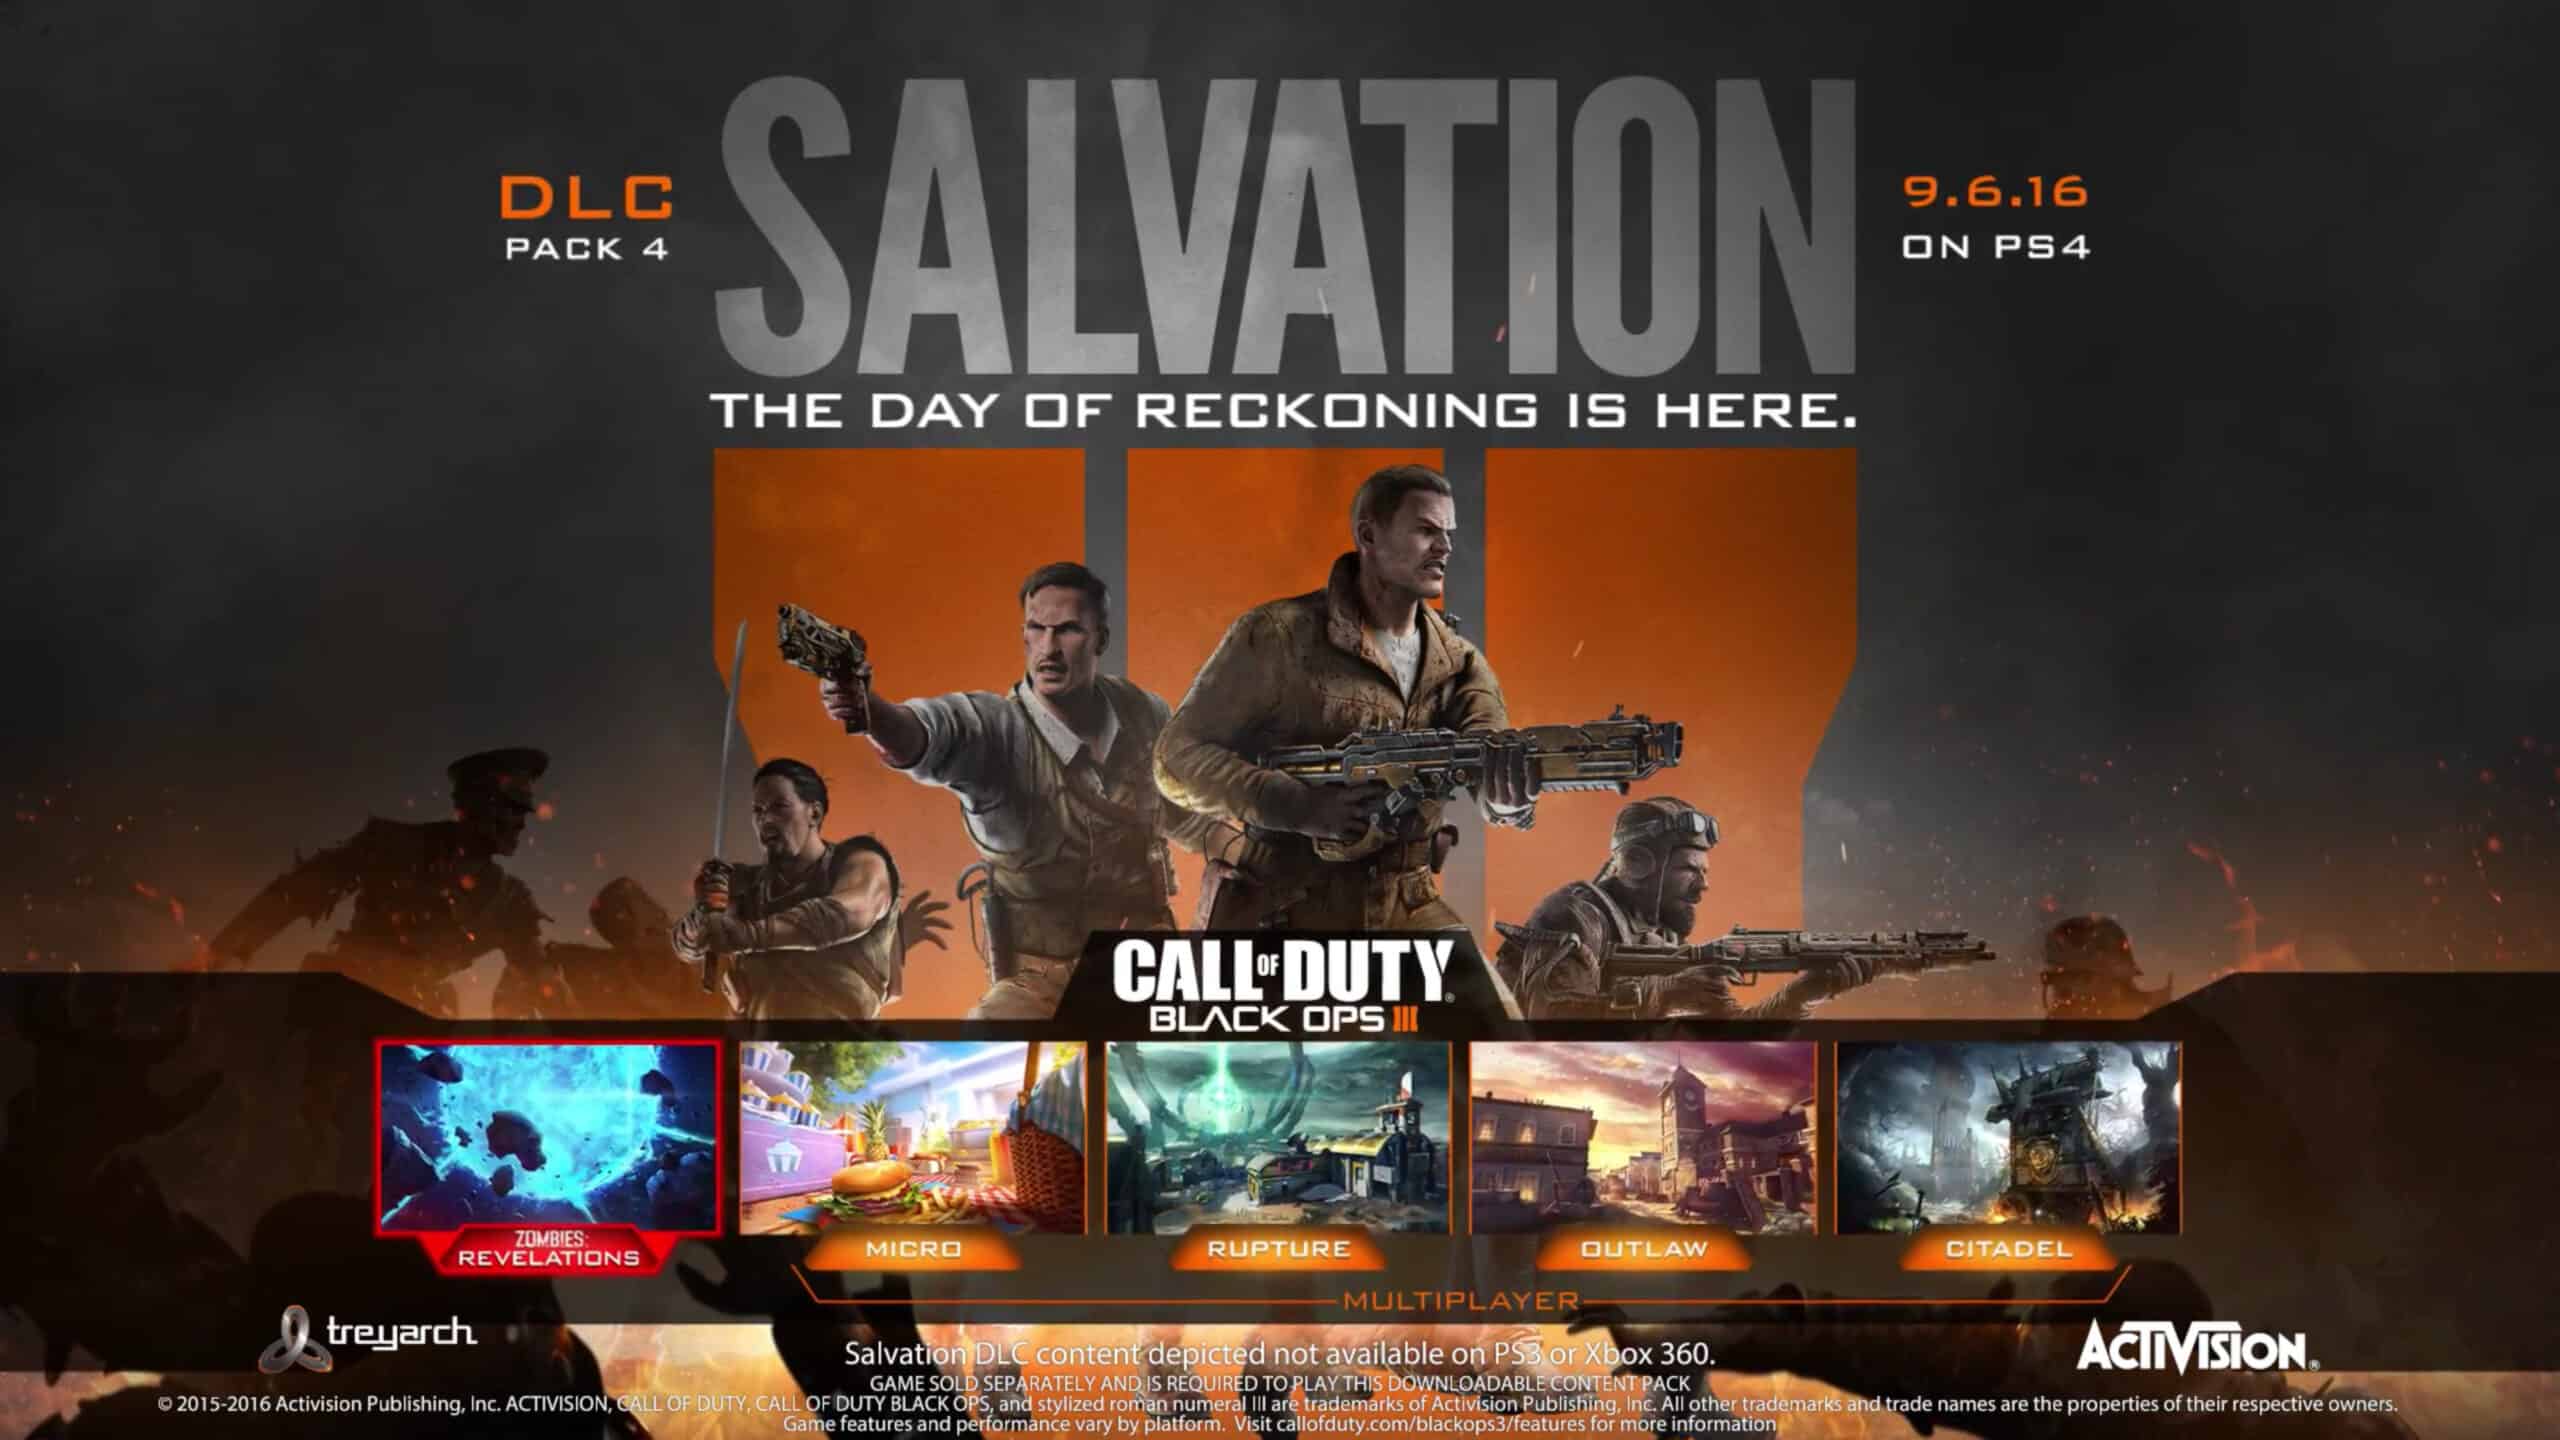 Call of Duty: Black Ops 3 DLC Pack 4 Salvation